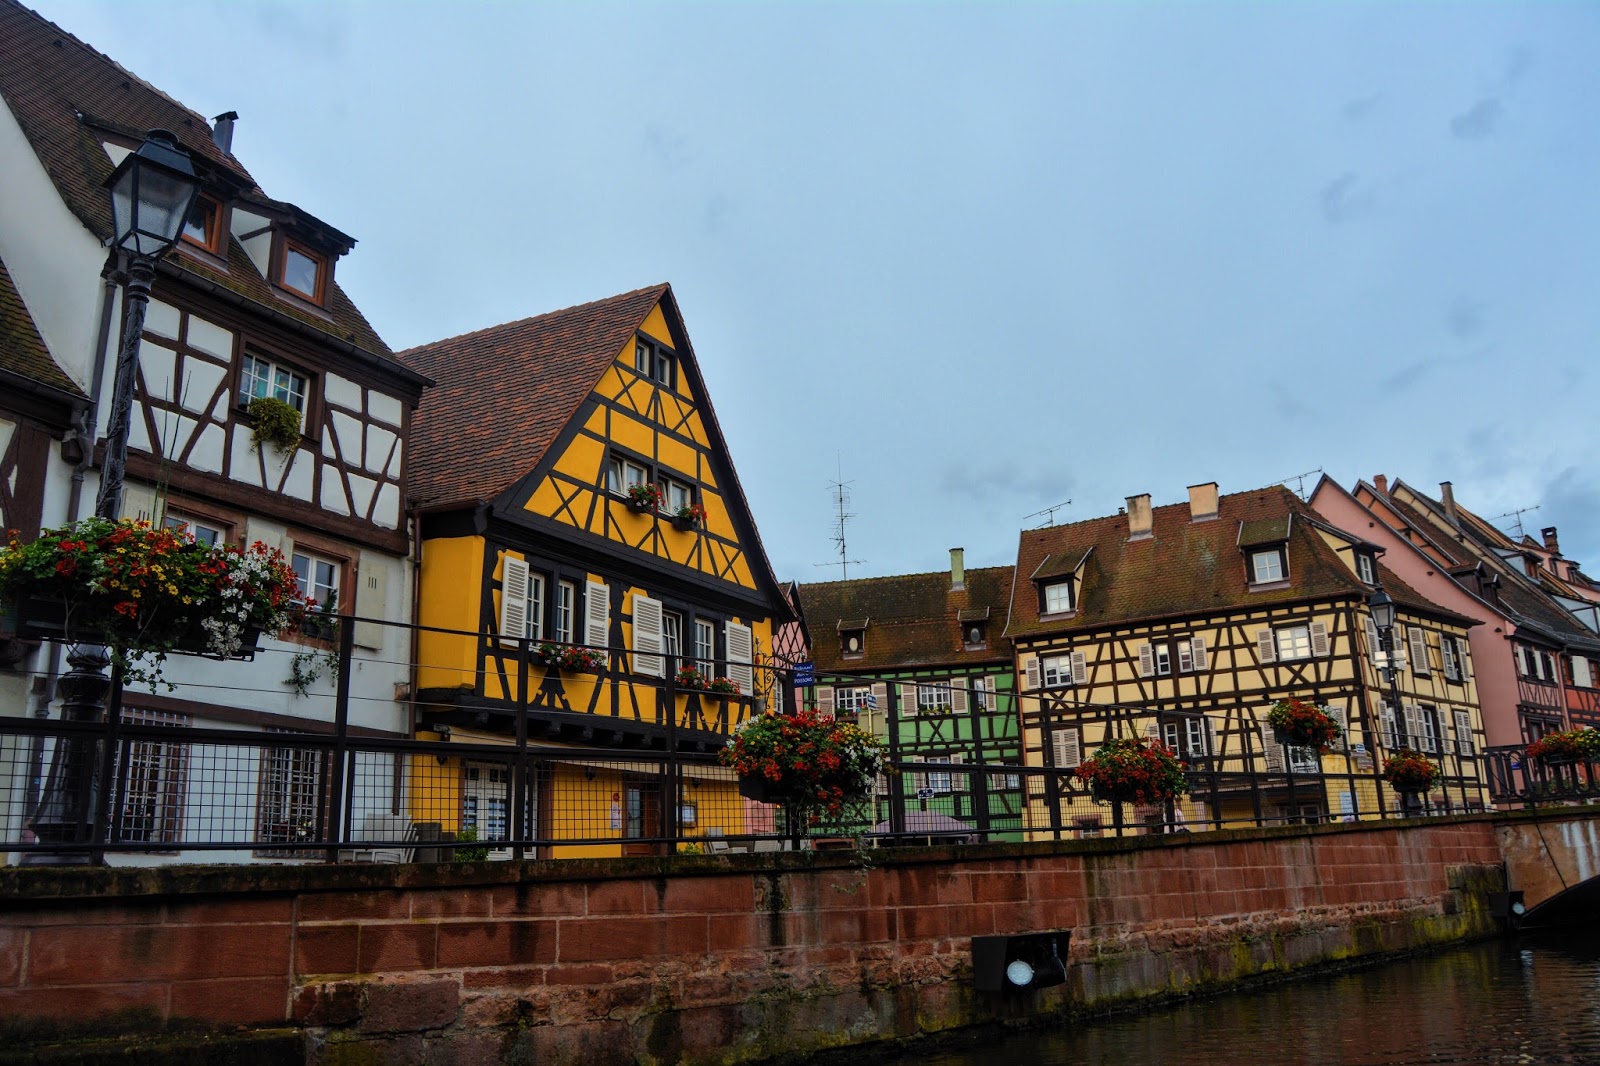 A colourful village in France, Colmar with lots of colourful houses